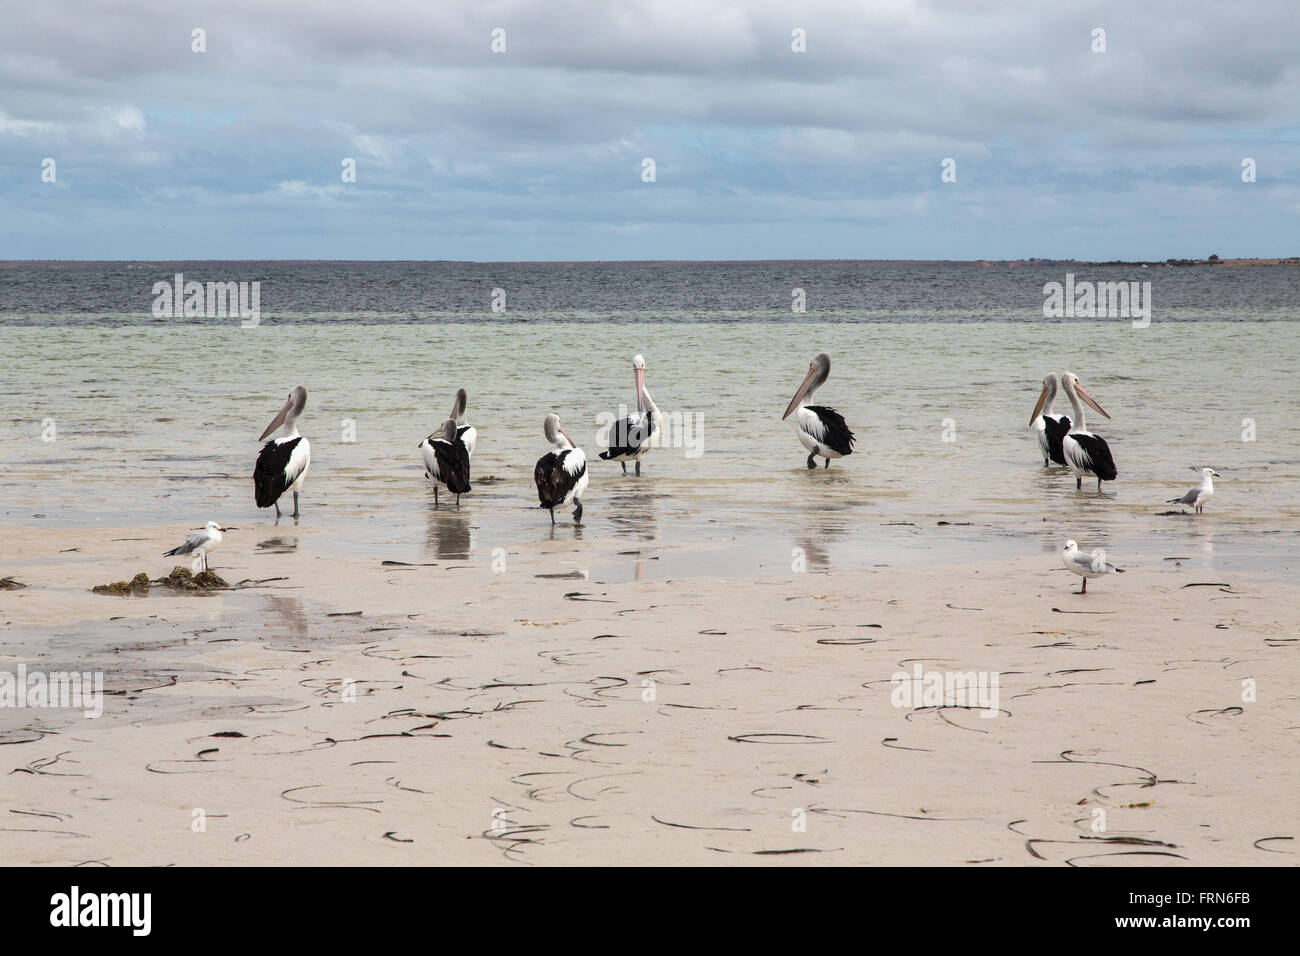 a group of pelicans and other seabirds standing in shallow beach water, Gulf St Vincent, South Australia Stock Photo